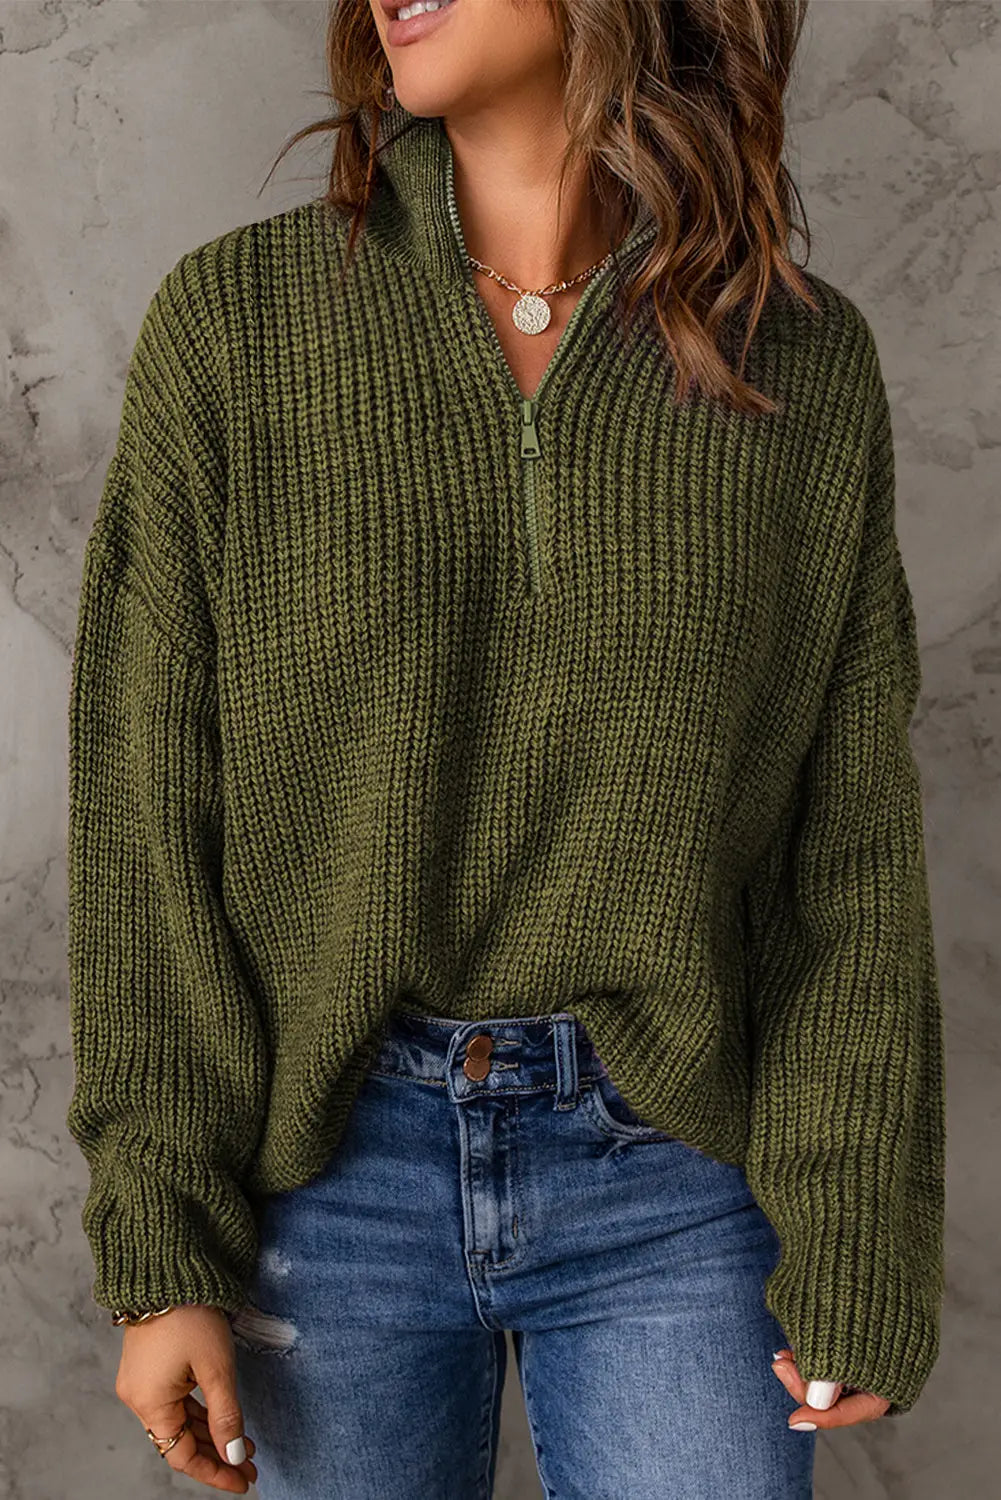 Red zipped turtleneck drop shoulder knit sweater - green / s / 100% polyester - sweaters & cardigans